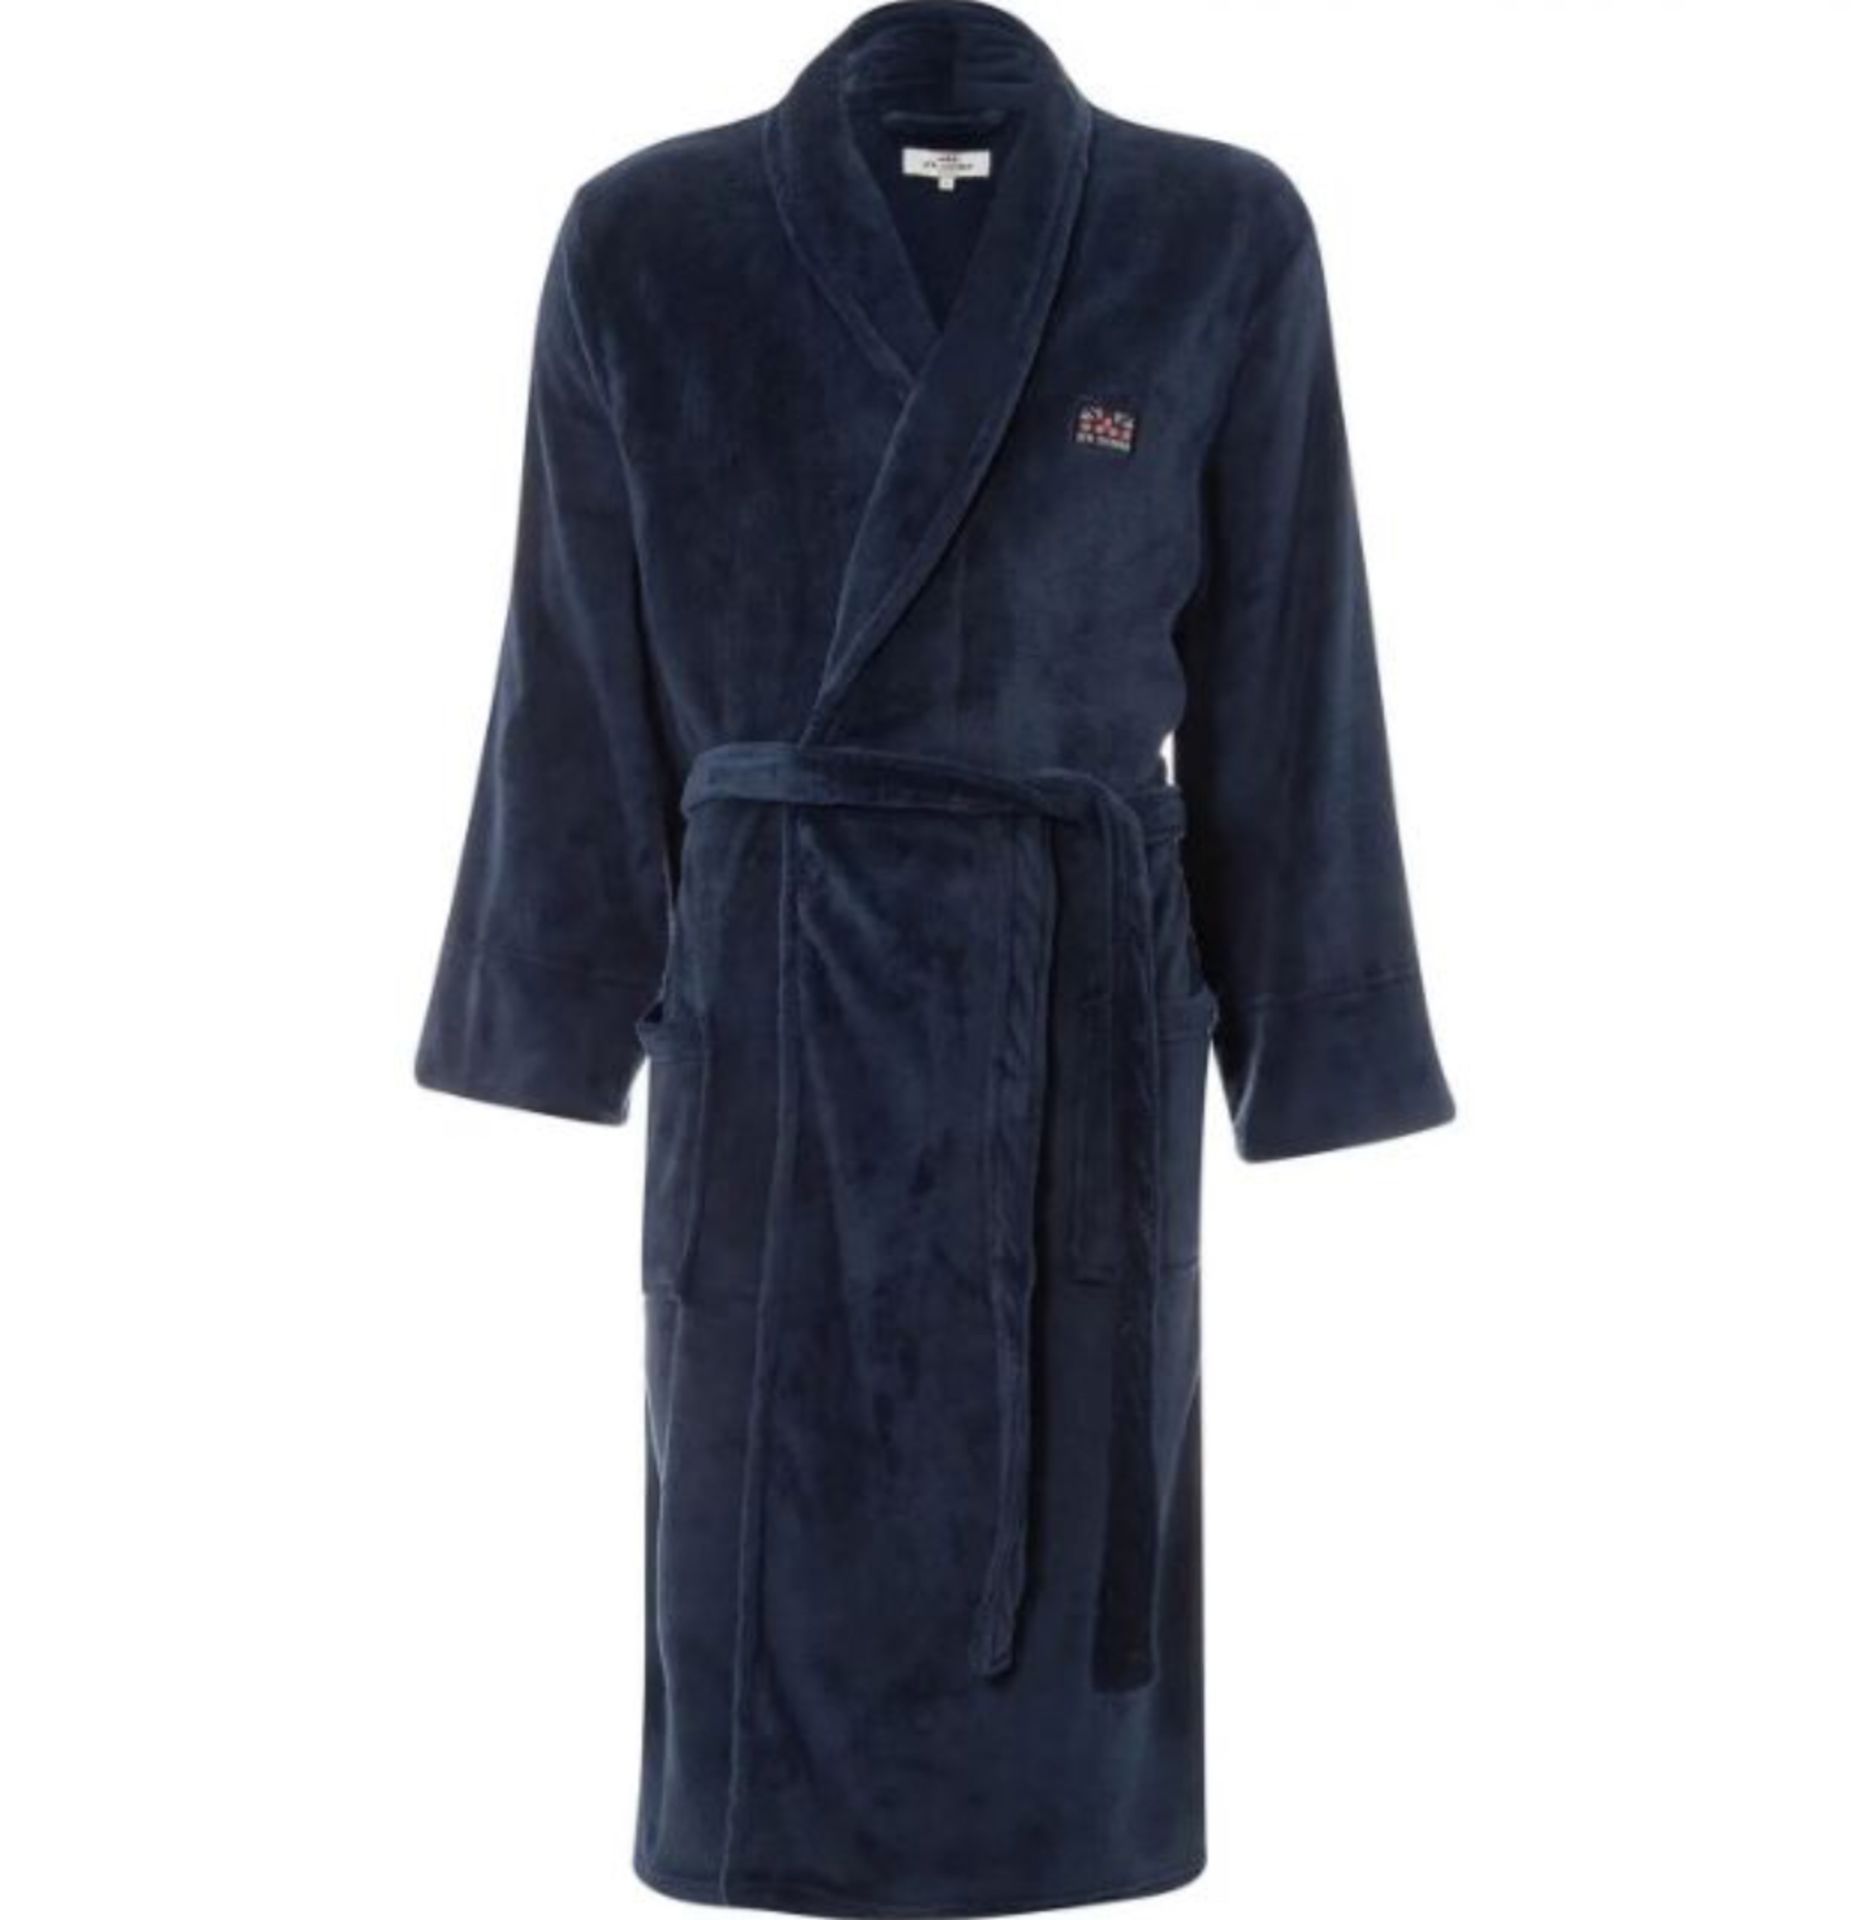 Ben Sherman Navy Fleece Dressing Gown / Tie Front Robe With Pockets XXL £50 - Image 2 of 3